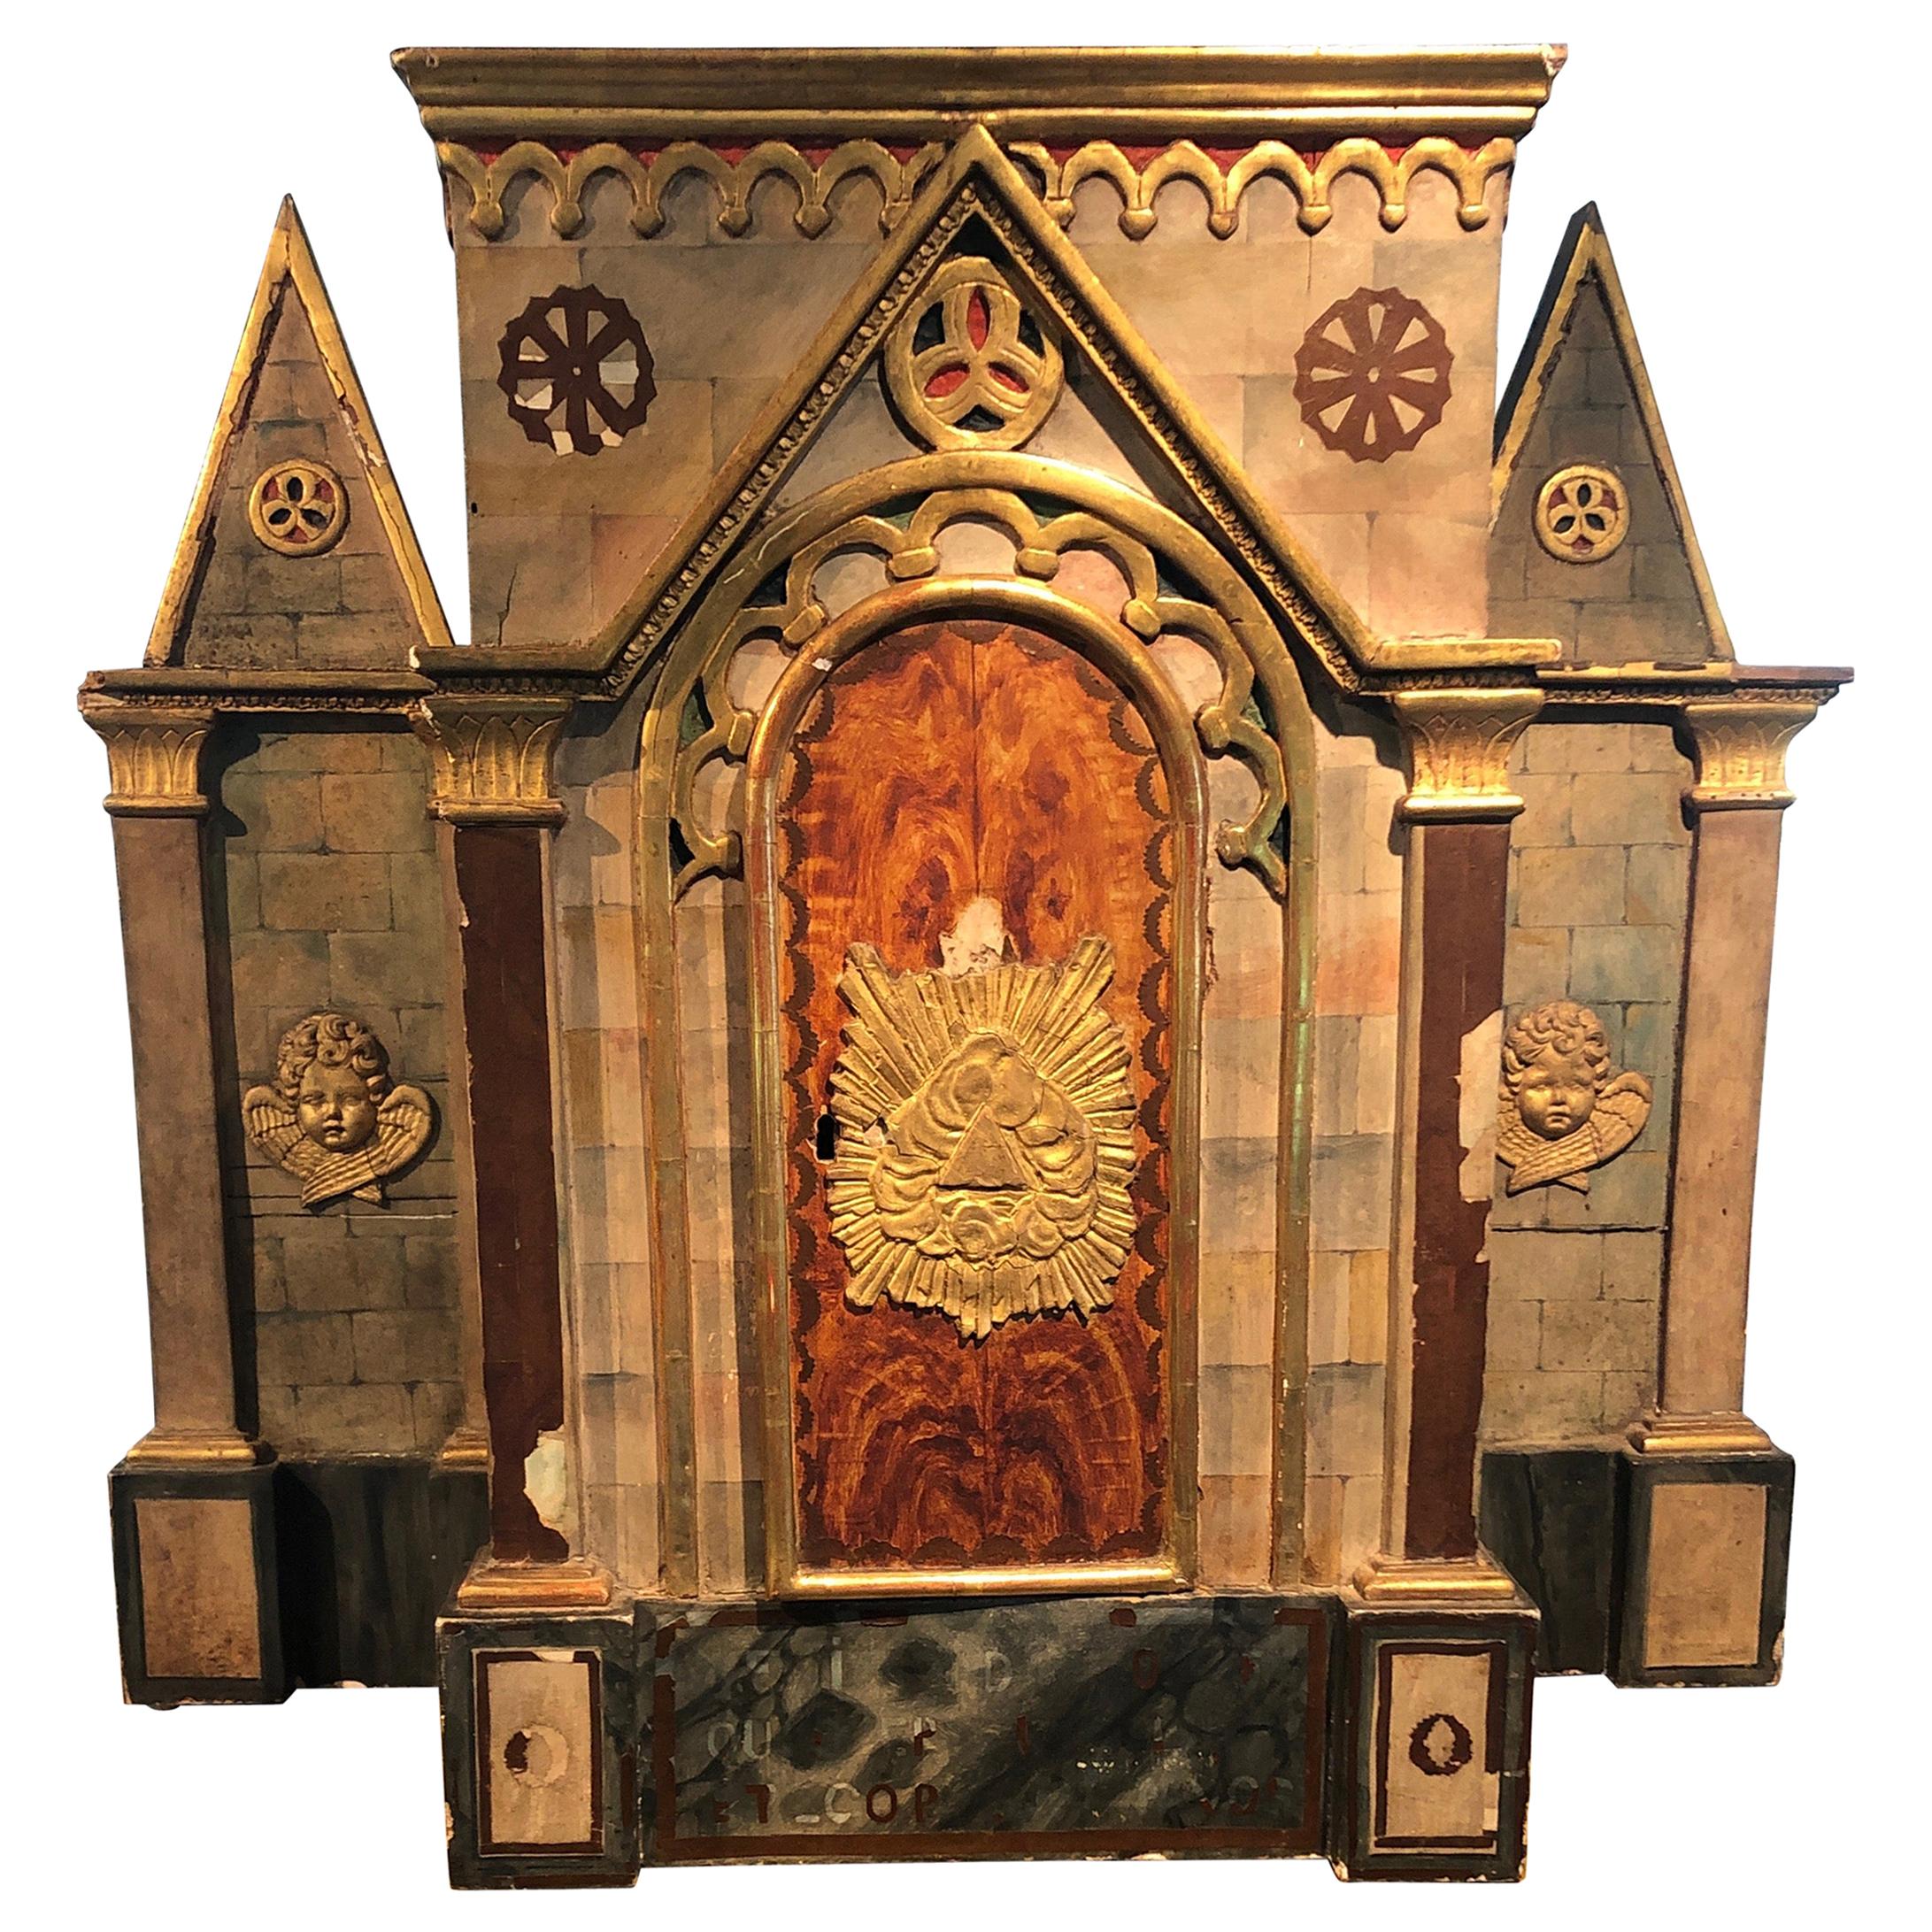 Magical Large Meticulously Detailed Gilt Cathedral Sculpture